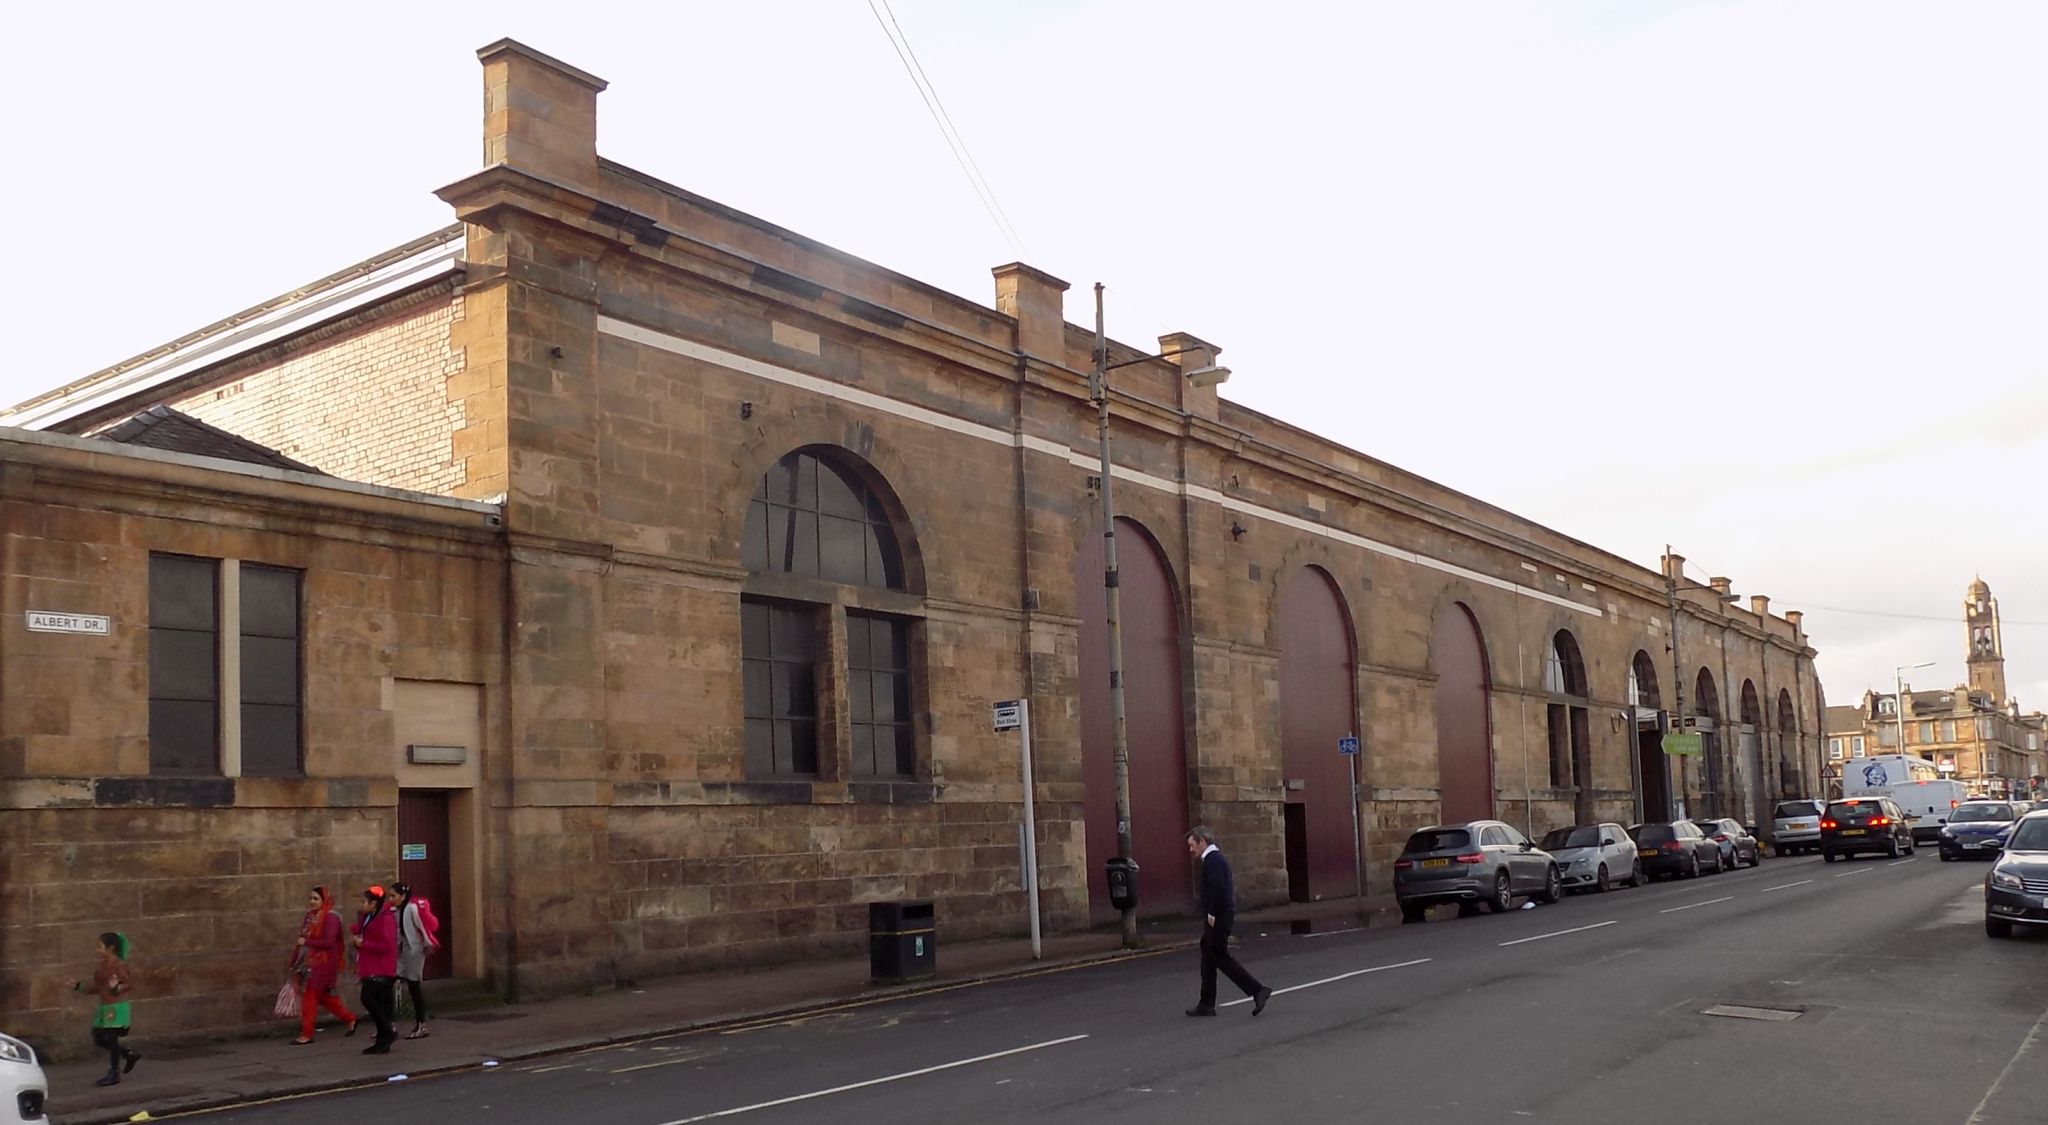 The former Coplawhill Glasgow Corporation Tramways depot